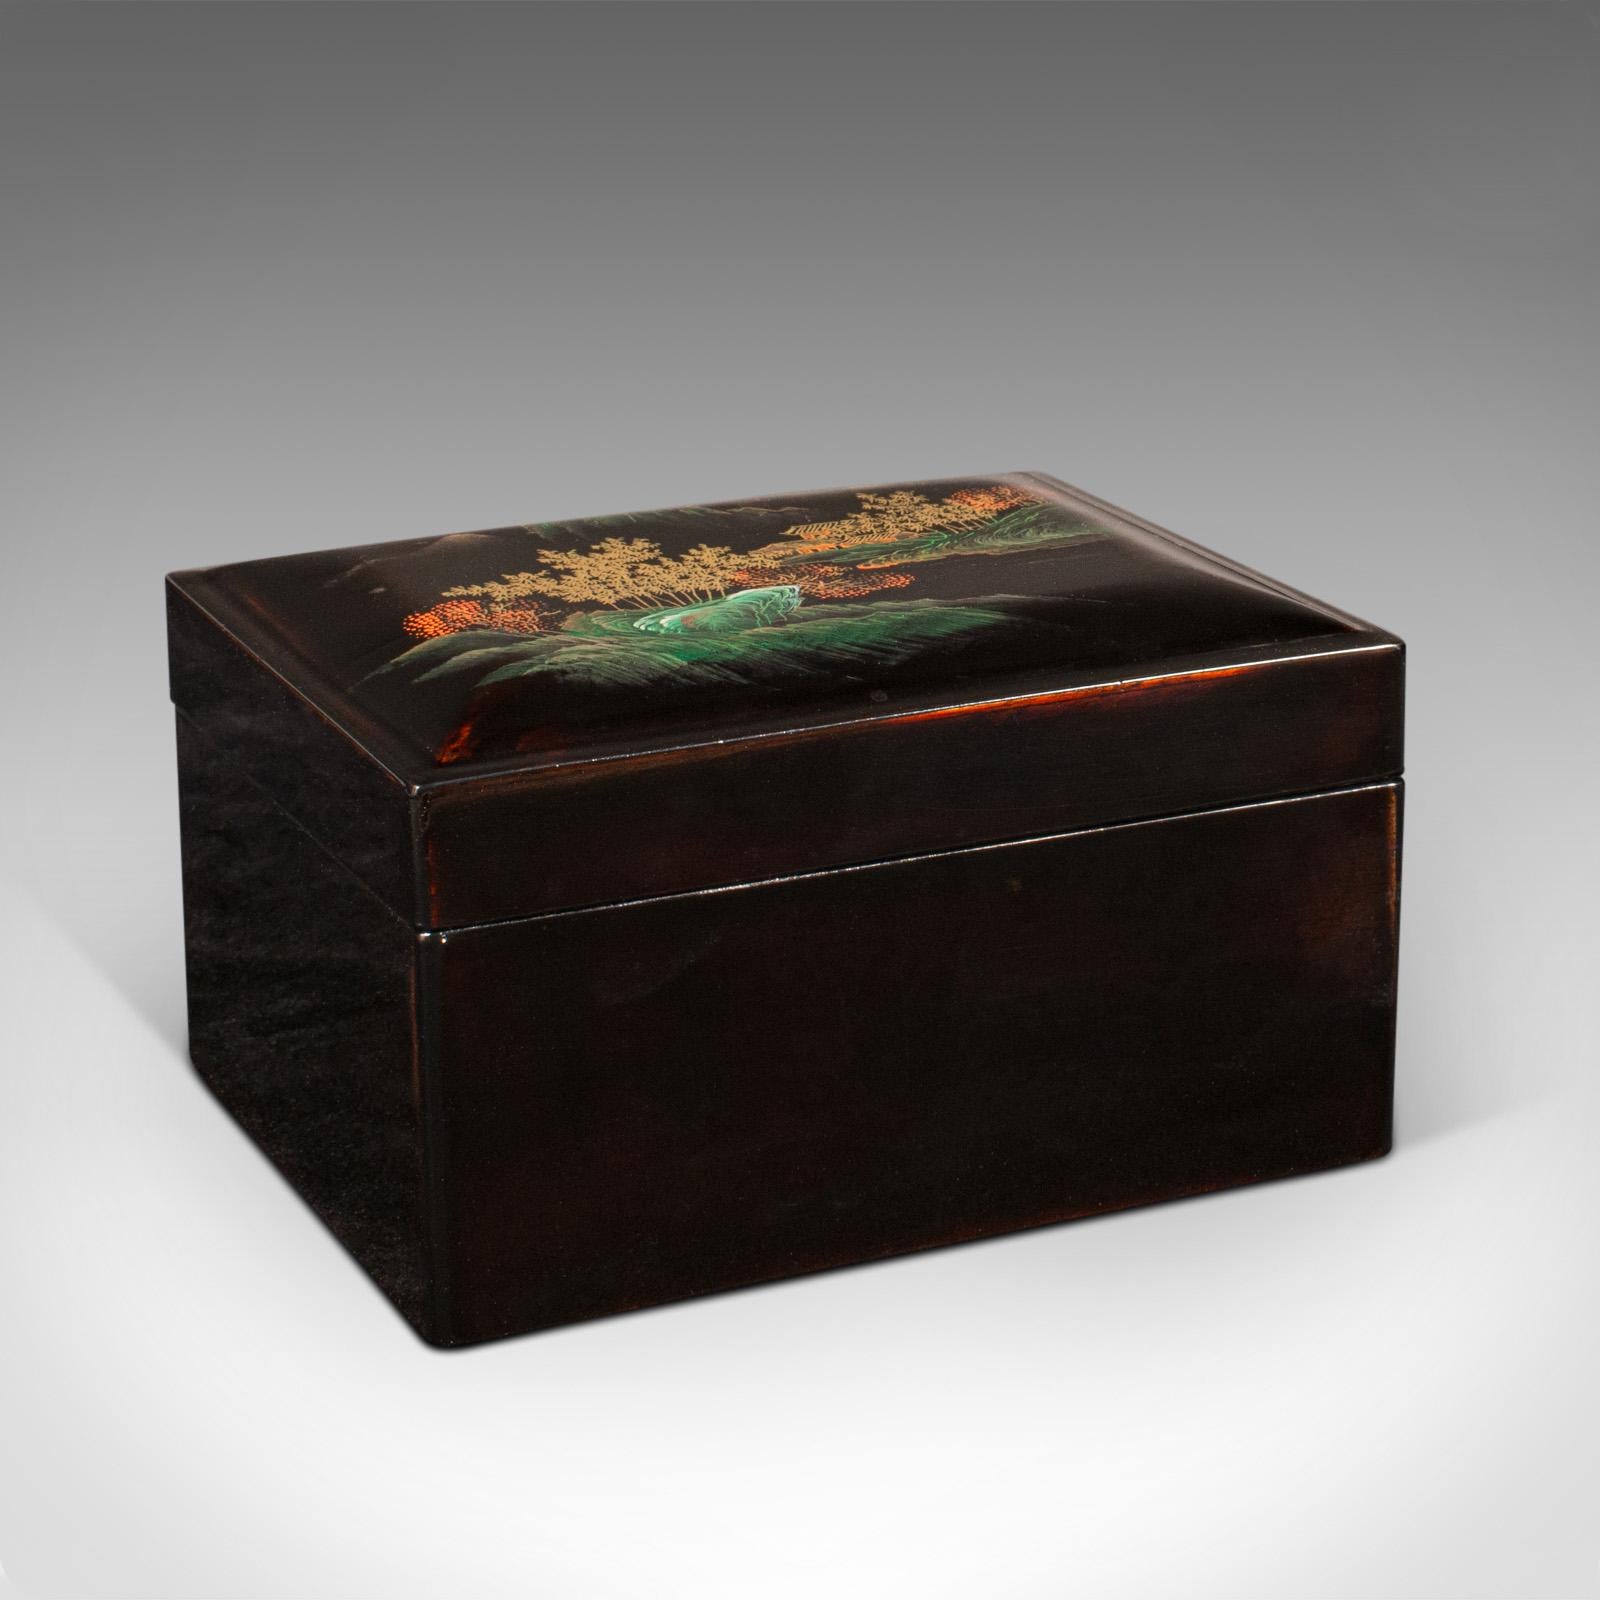 This is a trio of vintage nesting boxes. A Japanese, lacquered celluloid set of small storage boxes with handpainted decor, dating to the Art Deco period, circa 1940.

Petite and charming, with eye-catching painted decor
Displaying a desirable aged